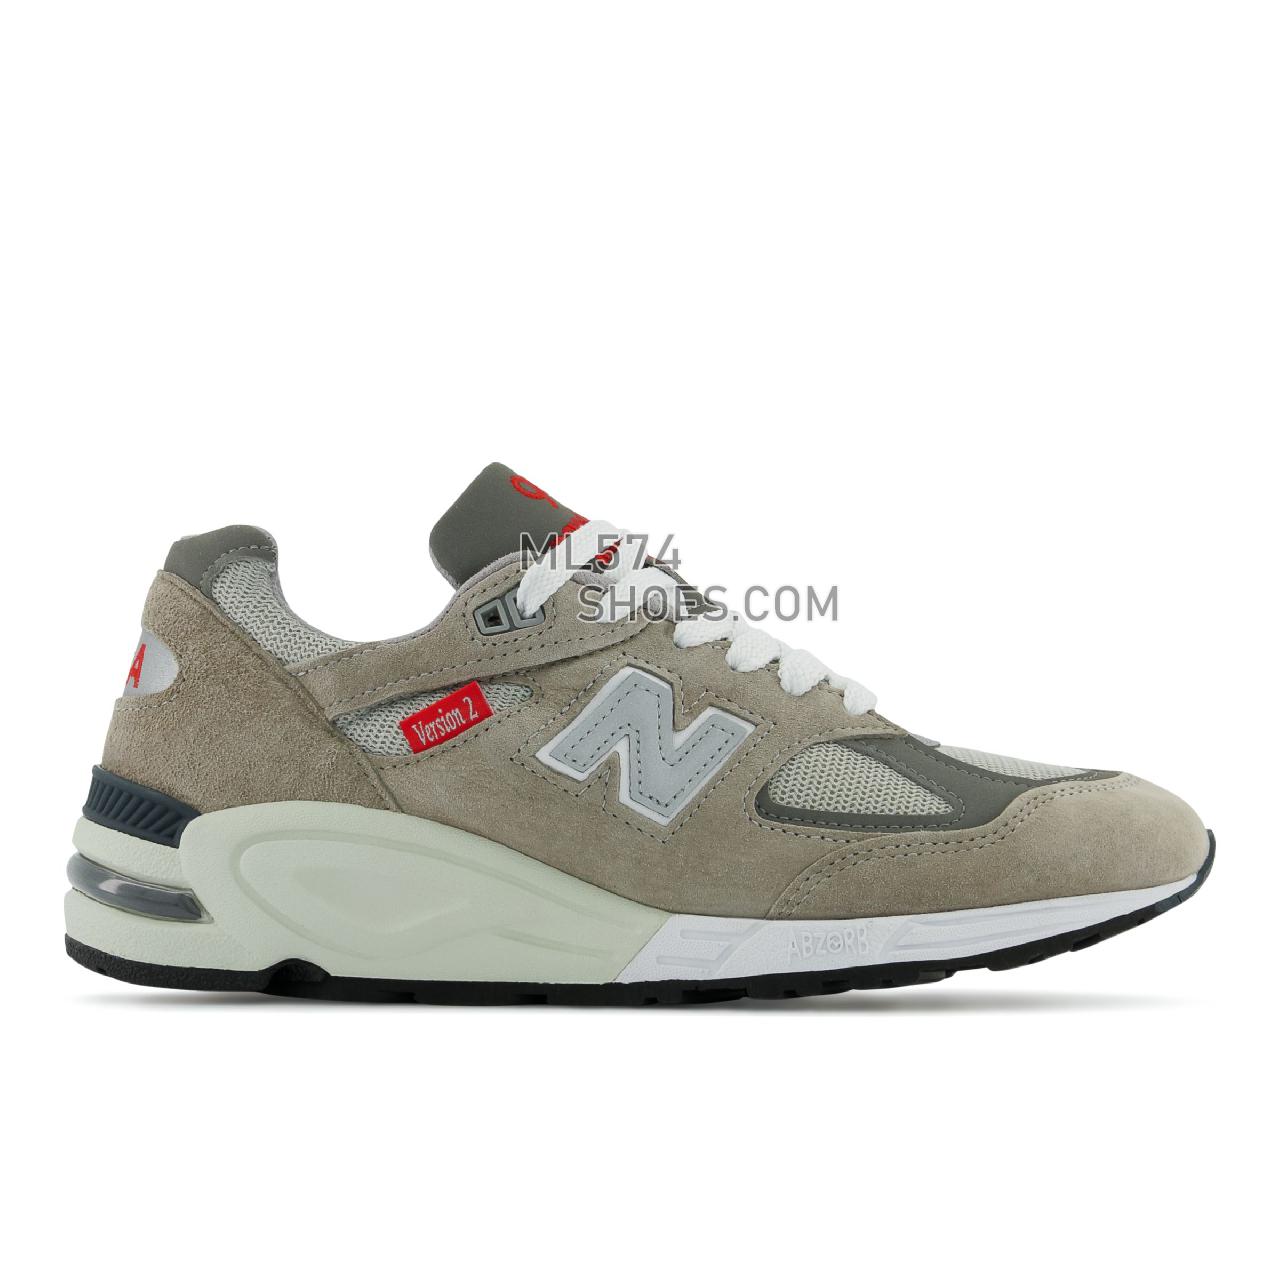 New Balance Made in USA 990v2 - Men's Made in USA And UK Sneakers - Grey with Red and White - M990VS2